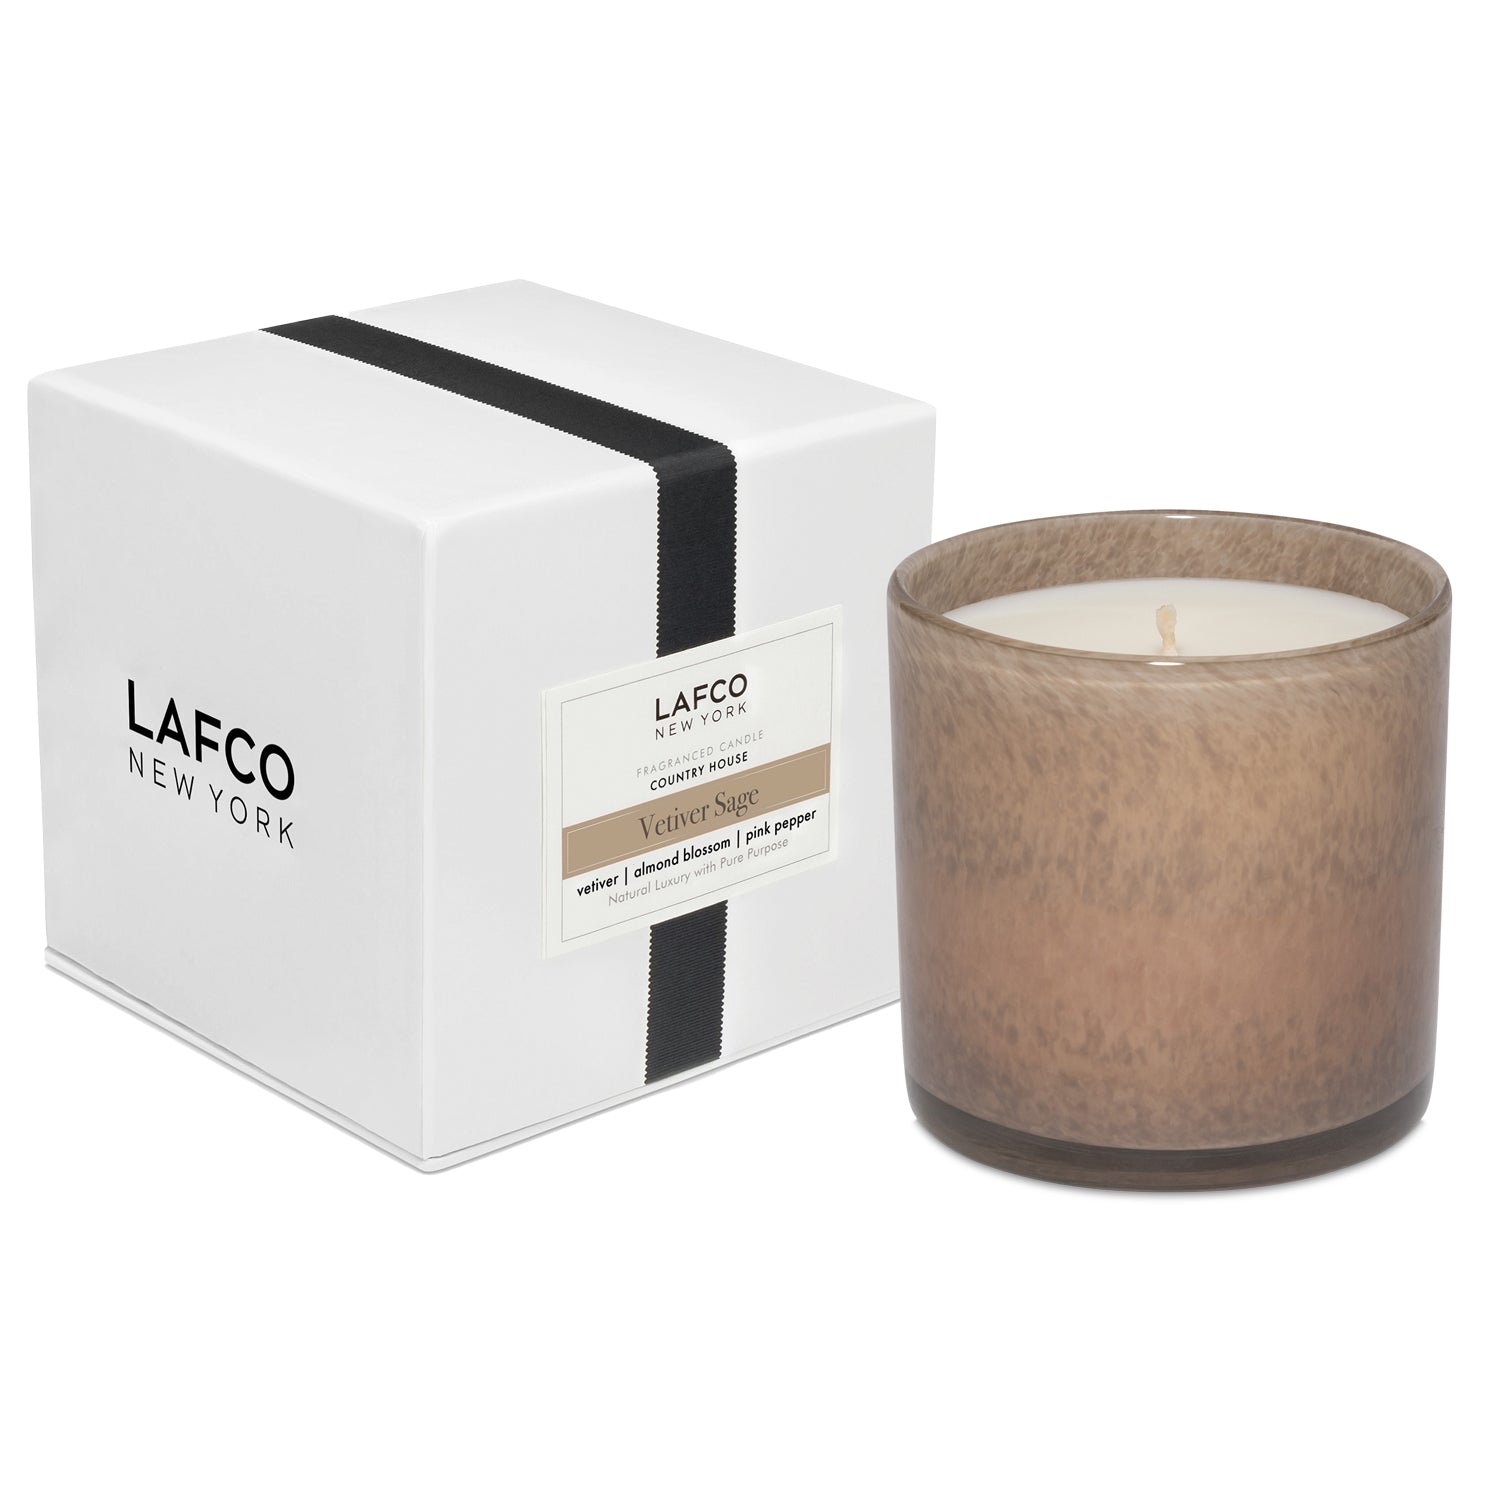 LAFCO 15.5 oz Country House (Vetiver Sage) Candle